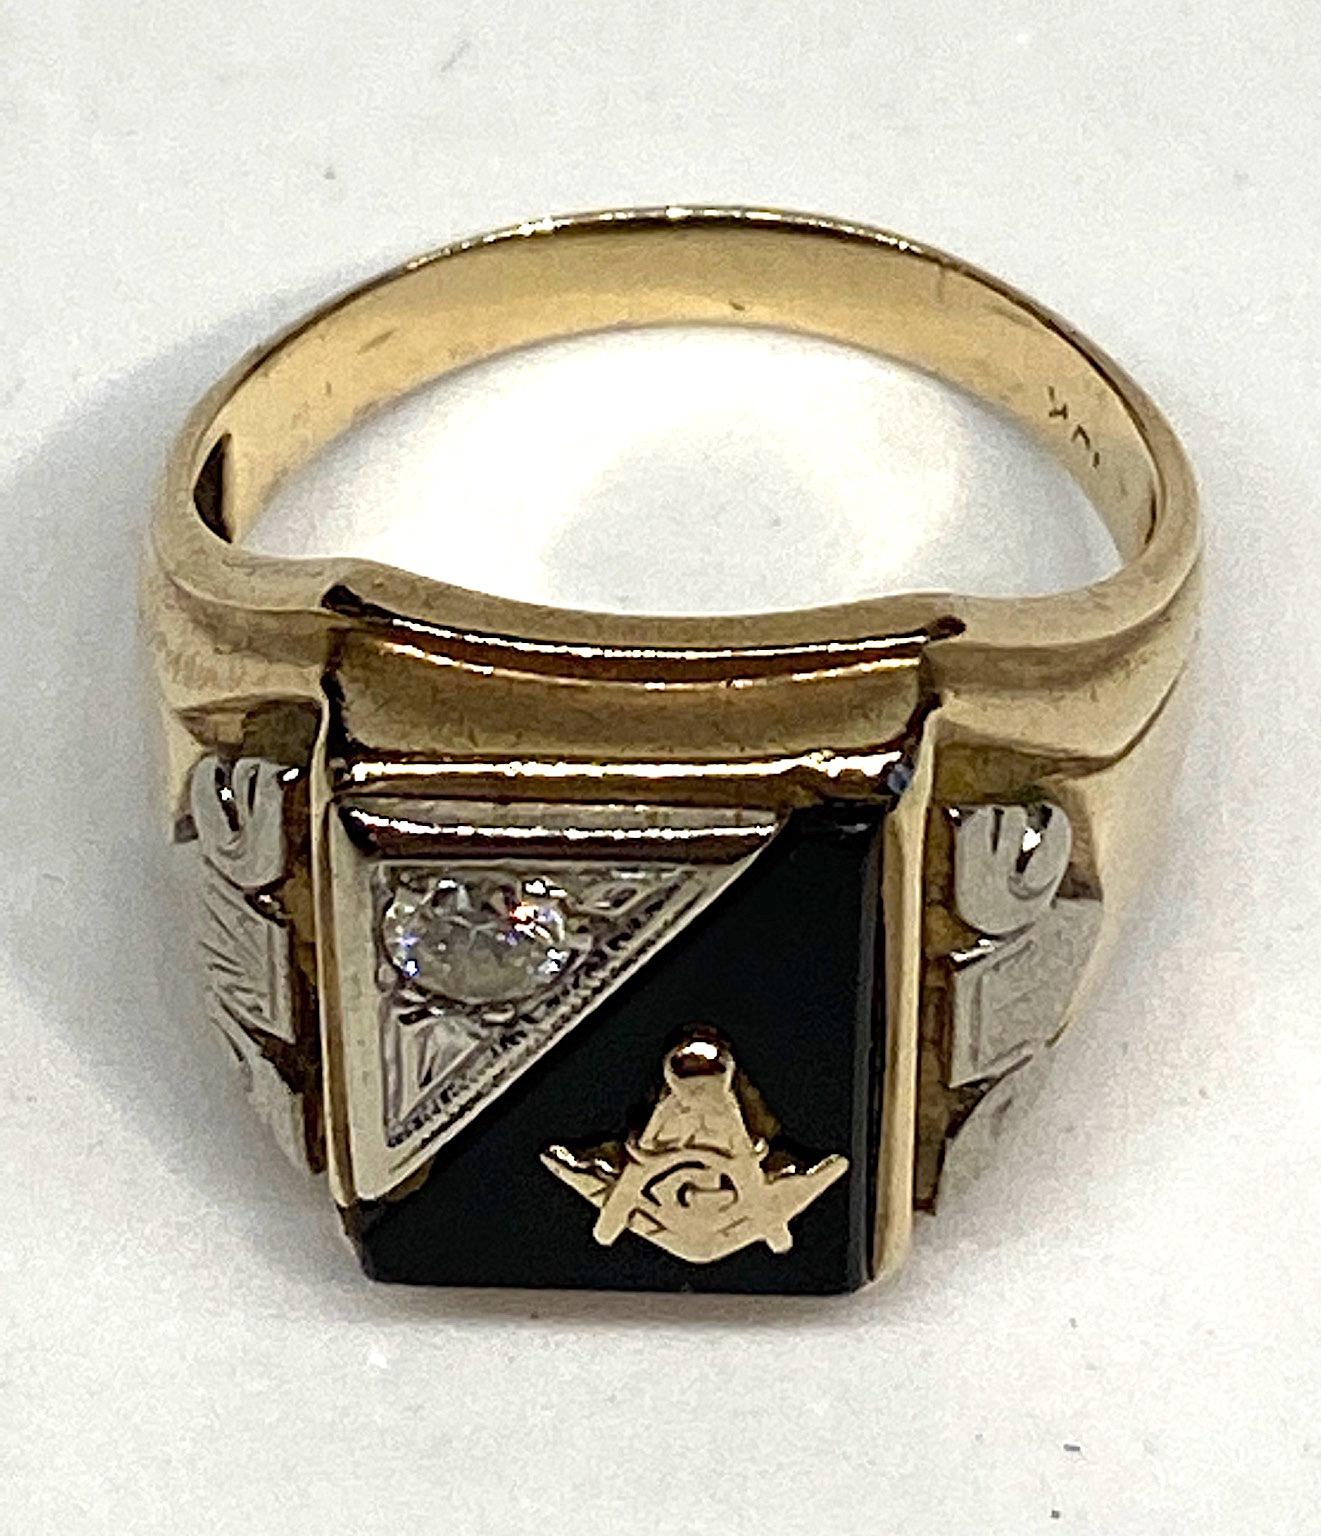 A vintage Art Deco mens Mason ring circa 1940. It is 10 karat yellow and white gold, black onyx and genuine diamond. The diamond is approximately a third of a carat and it is mounted into a etched triangle of white gold. Two more white gold